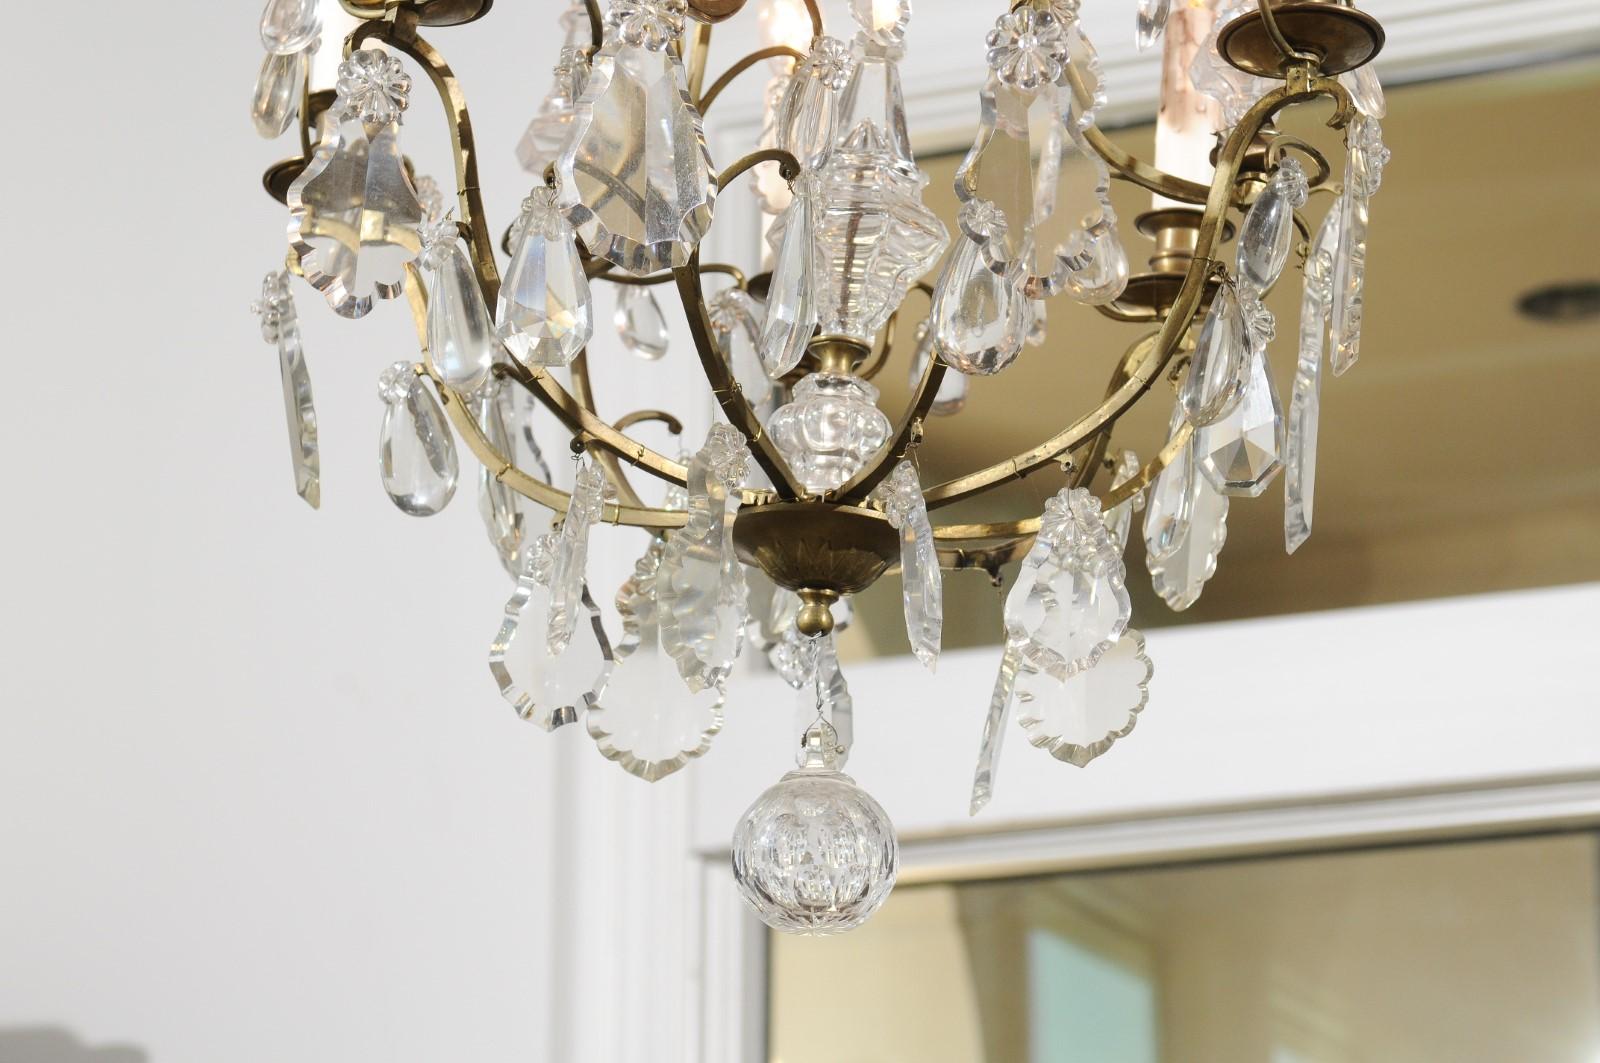 French 19th Century Six-Light Crystal Chandelier with Scrolled Brass Armature For Sale 1